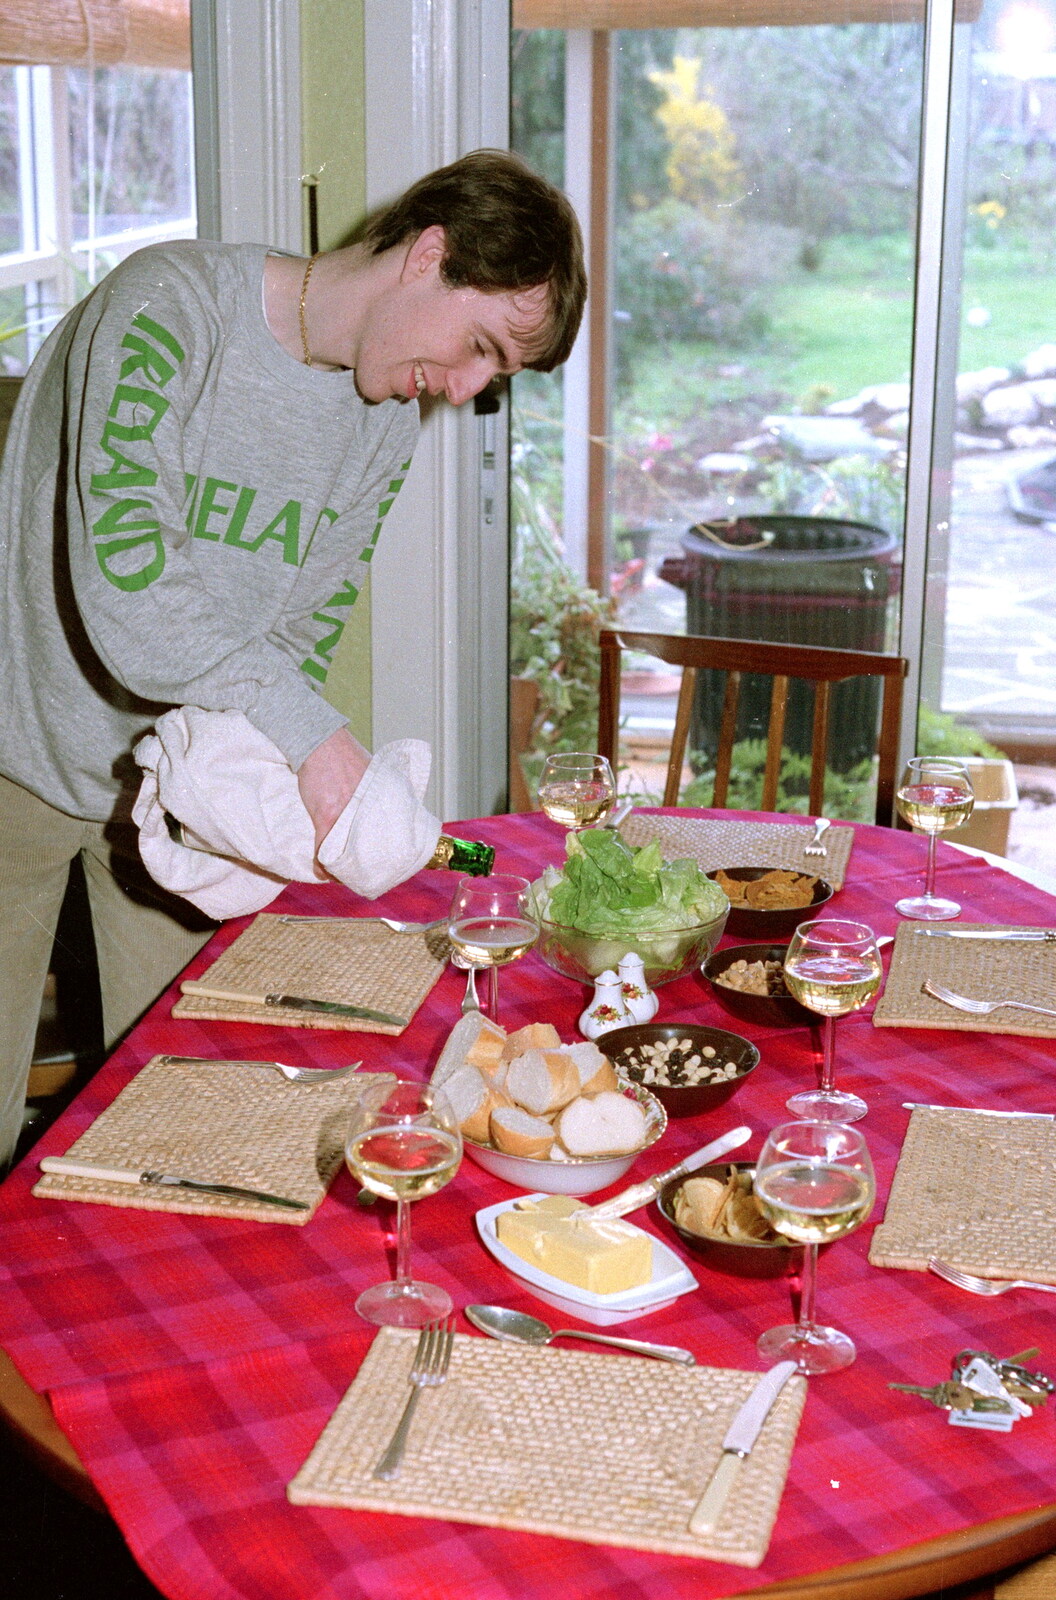 Dave pours fizz from Trotsky's Birthday, New Malden, Kingston Upon Thames - 20th April 1986